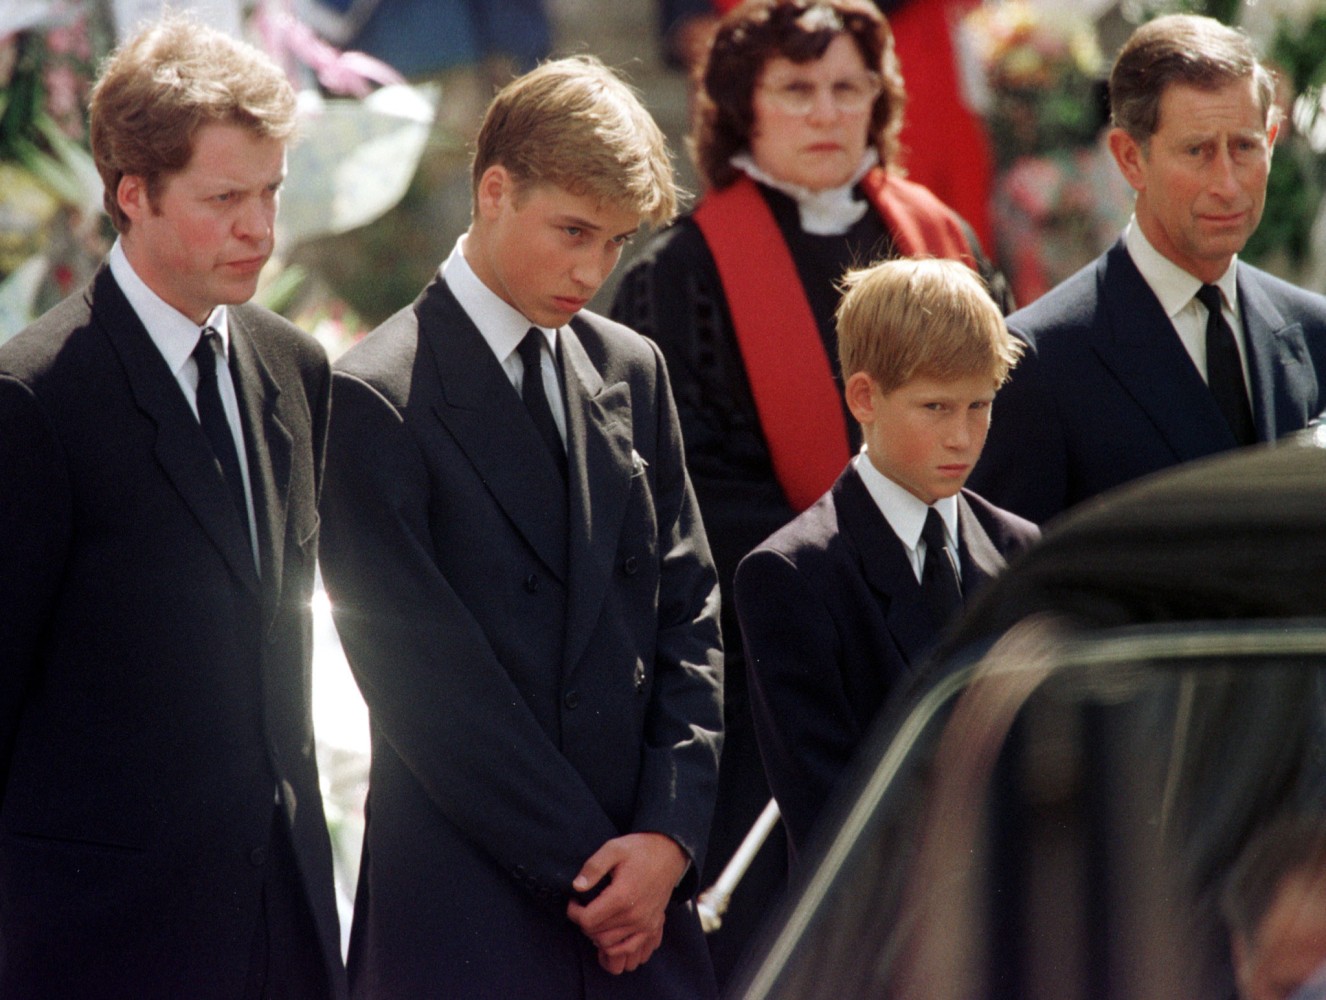 Prince Harry on Diana: No Child Should Have to Walk Behind ...